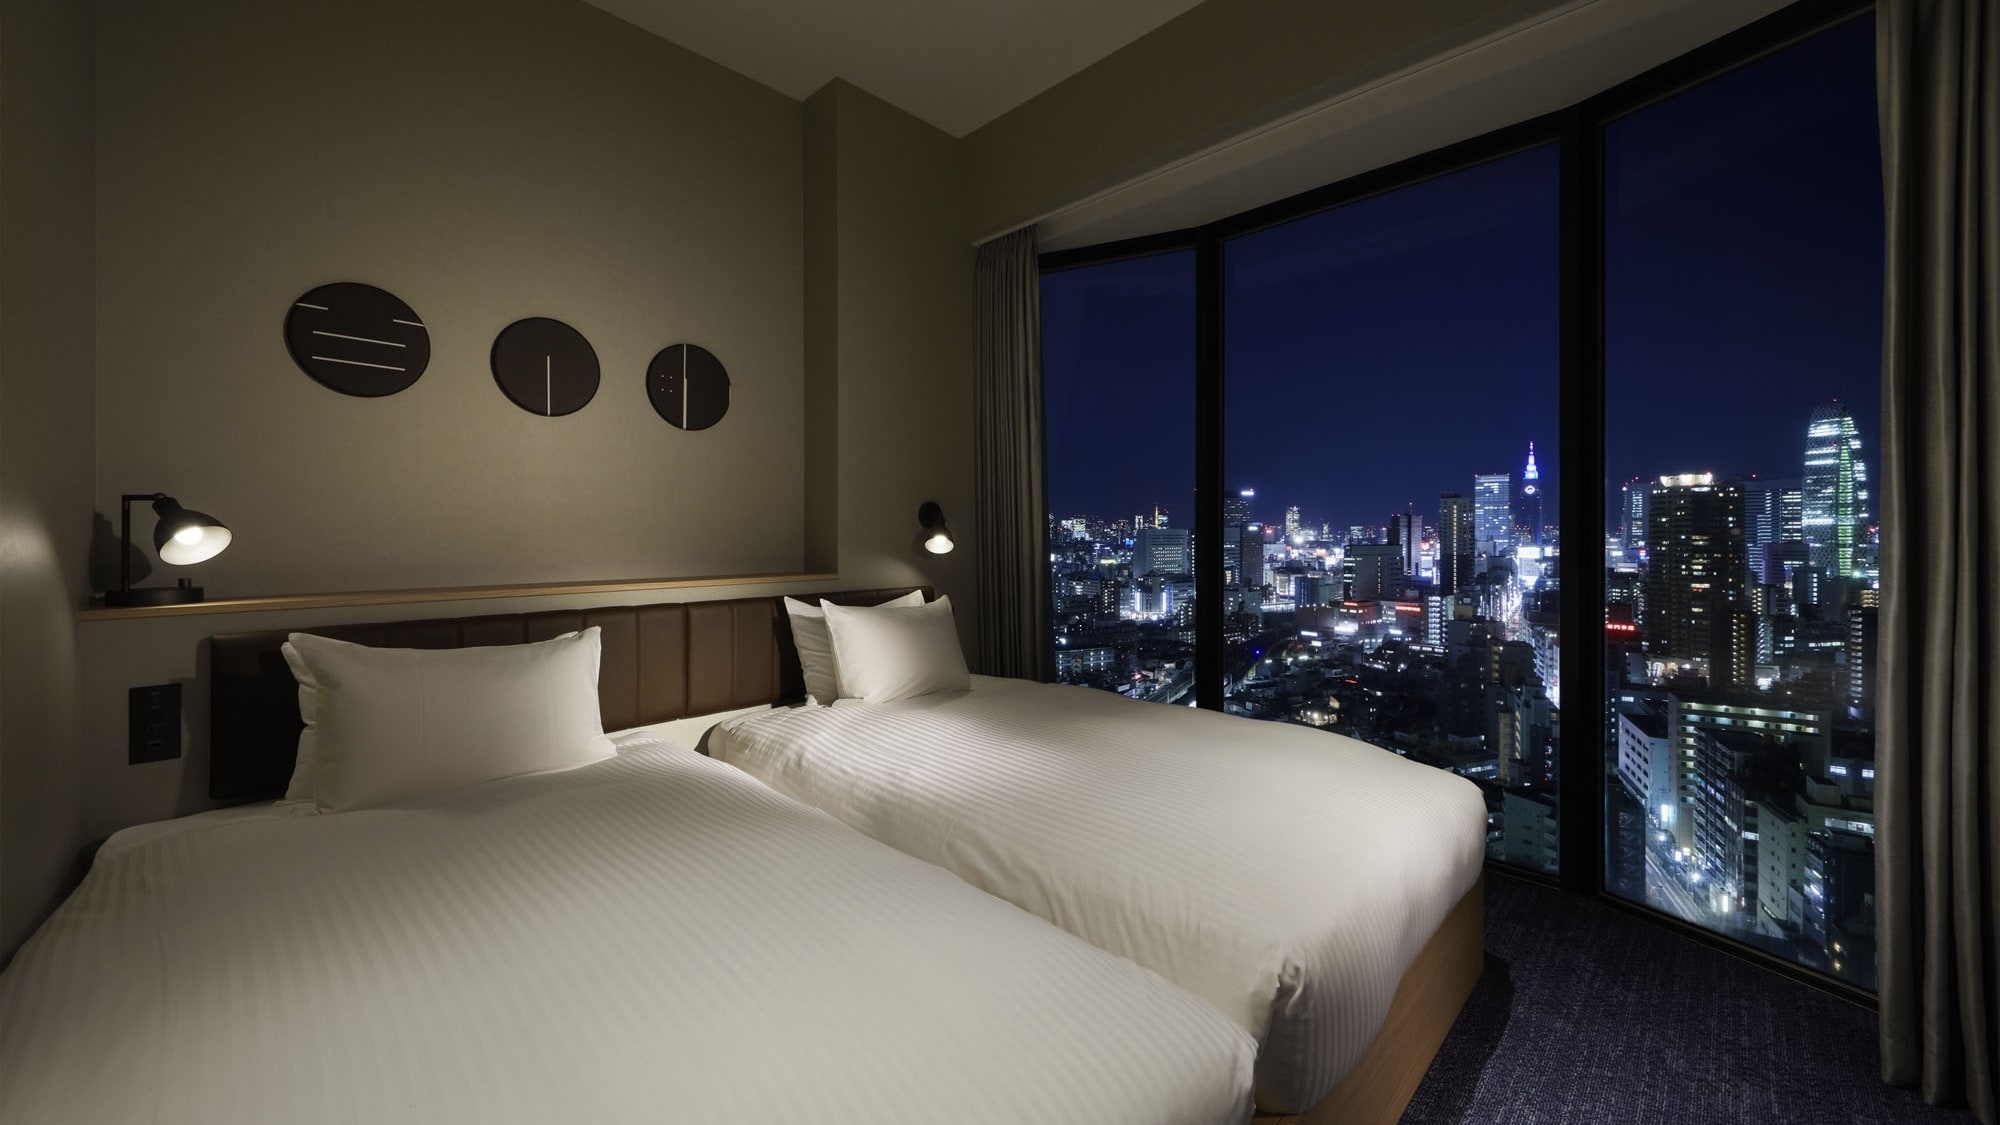 ◆Mercury Suite｜Enjoy a luxurious moment while gazing at the glittering nightscape of the city.